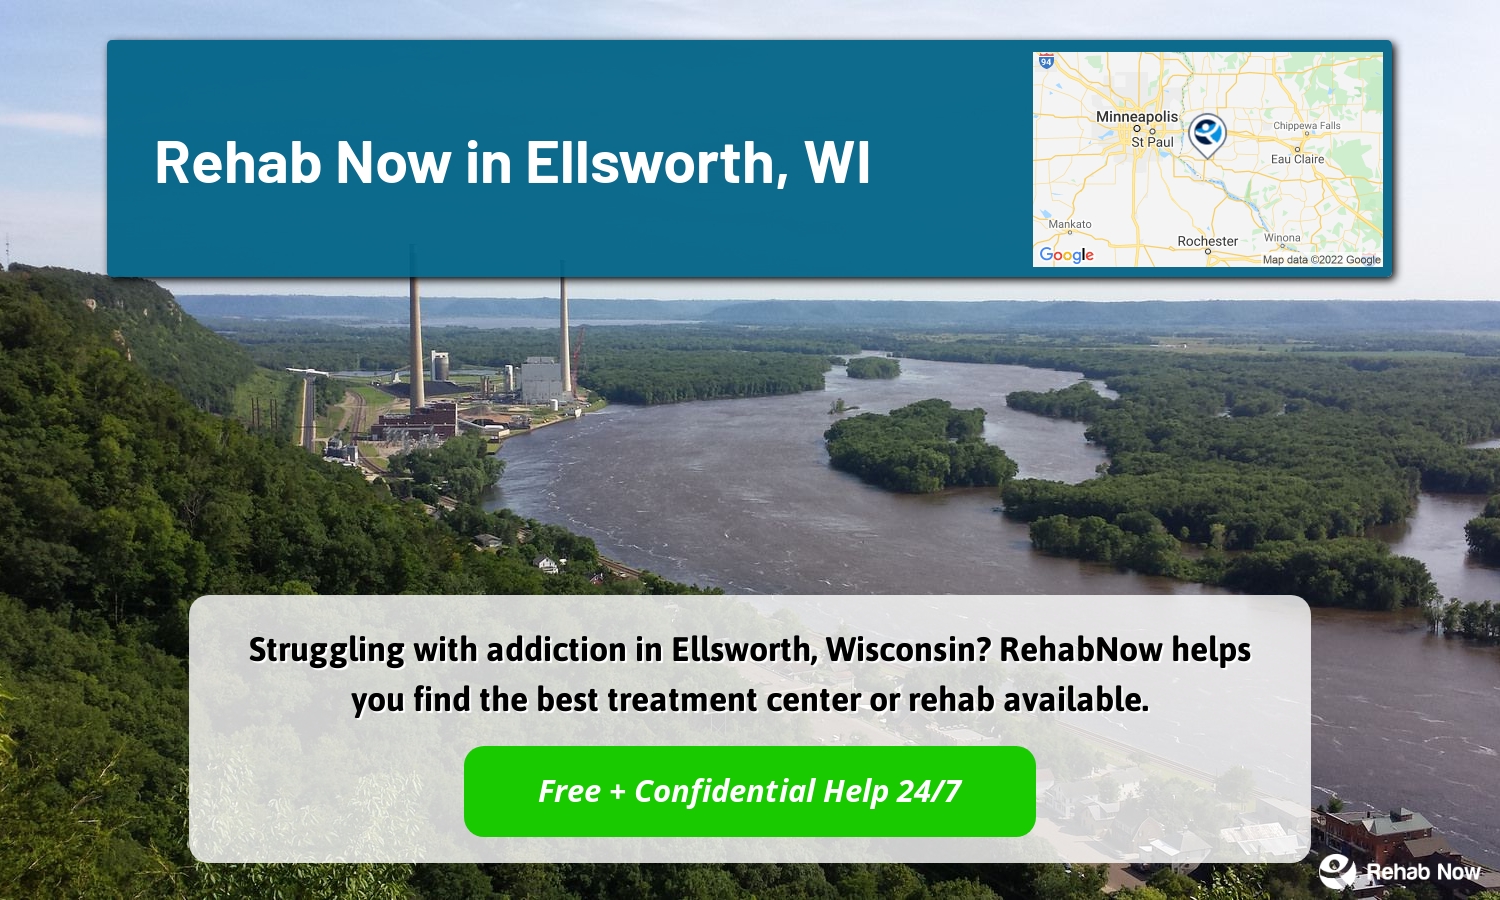 Struggling with addiction in Ellsworth, Wisconsin? RehabNow helps you find the best treatment center or rehab available.